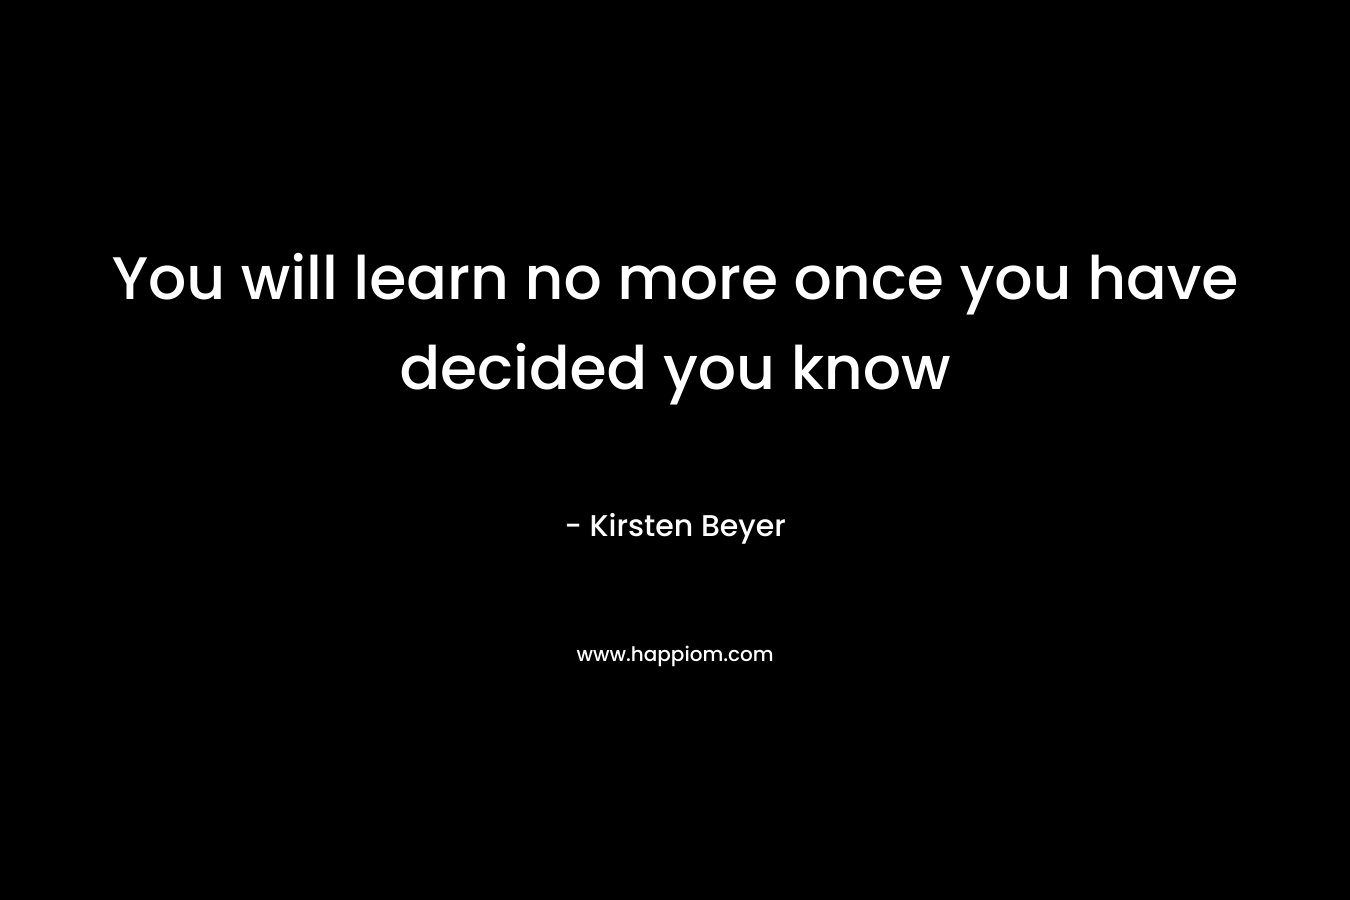 You will learn no more once you have decided you know